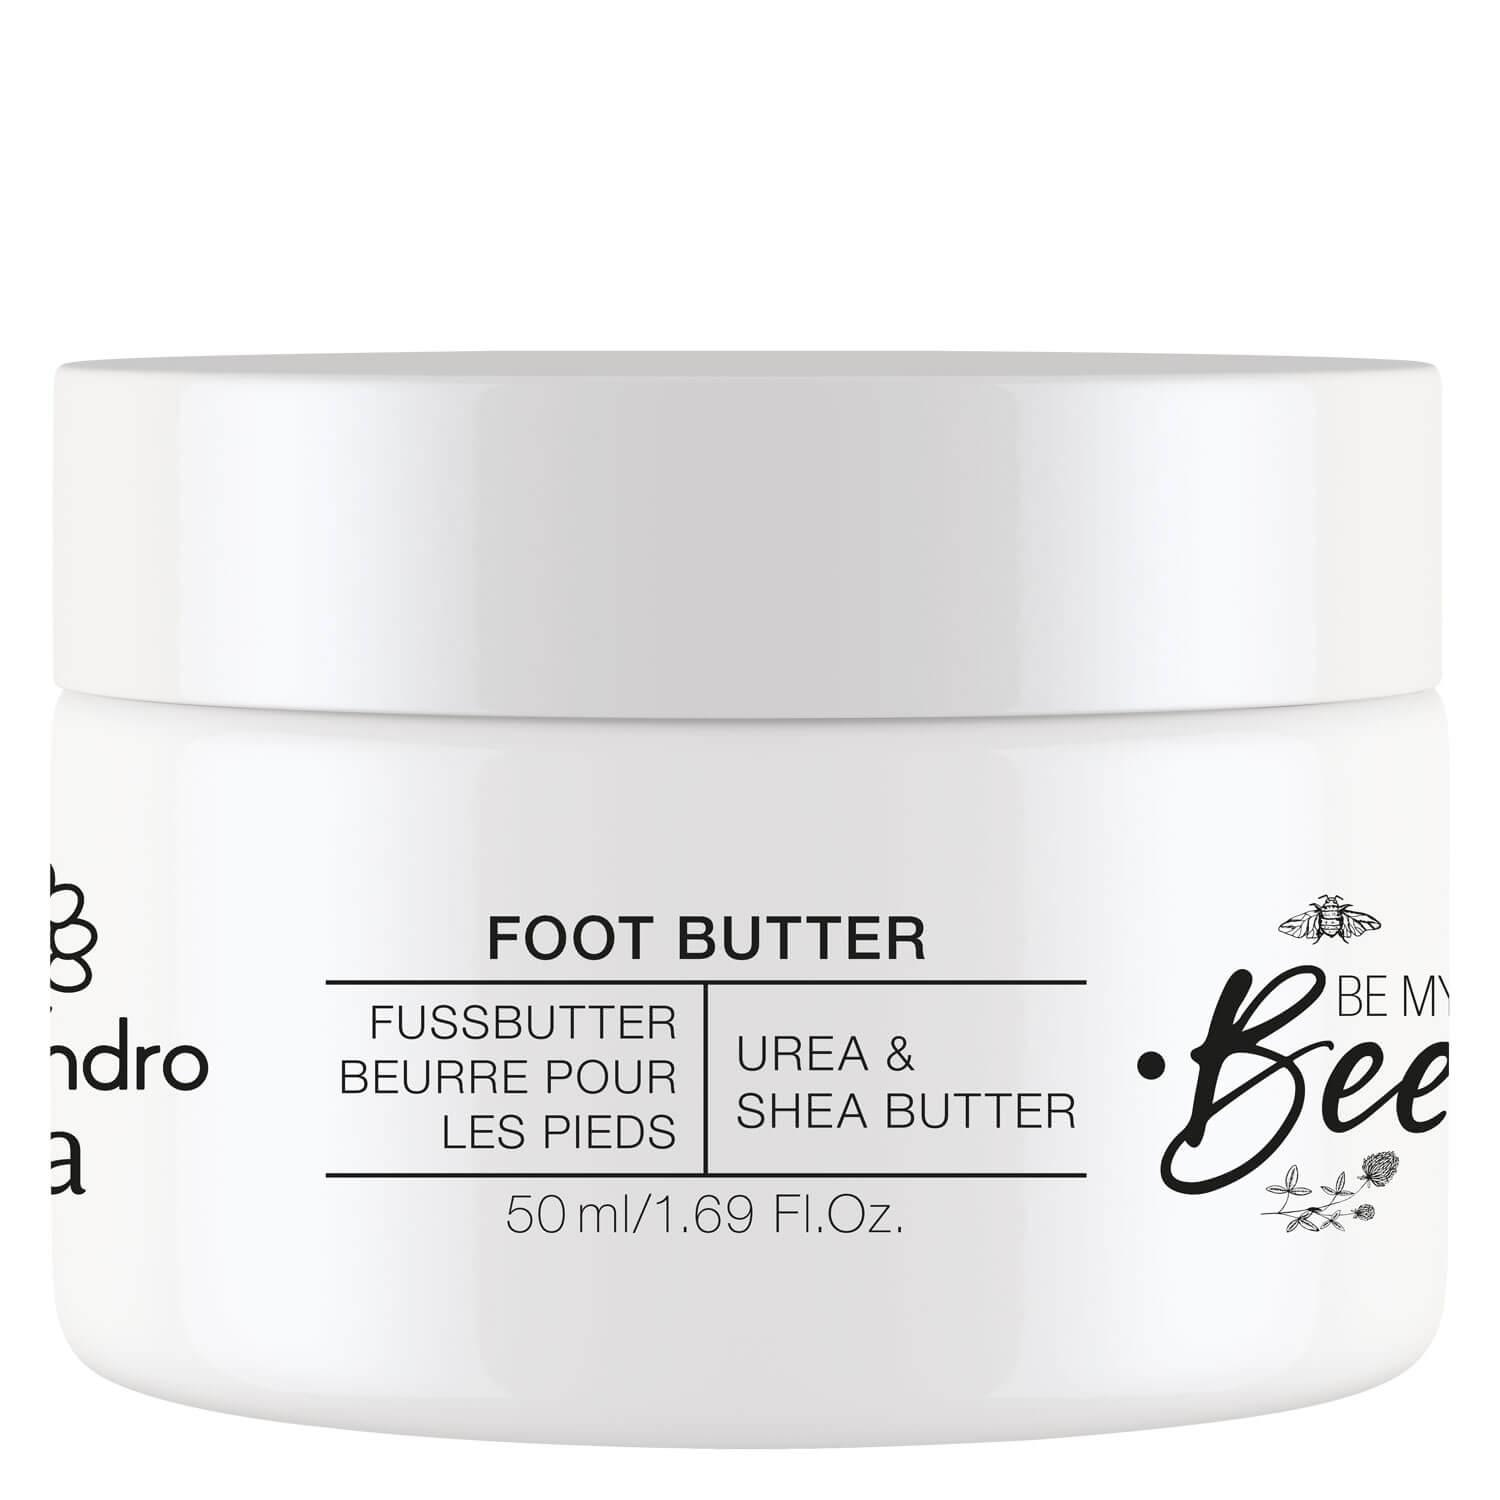 Alessandro Spa - Be My Bee Fussbutter